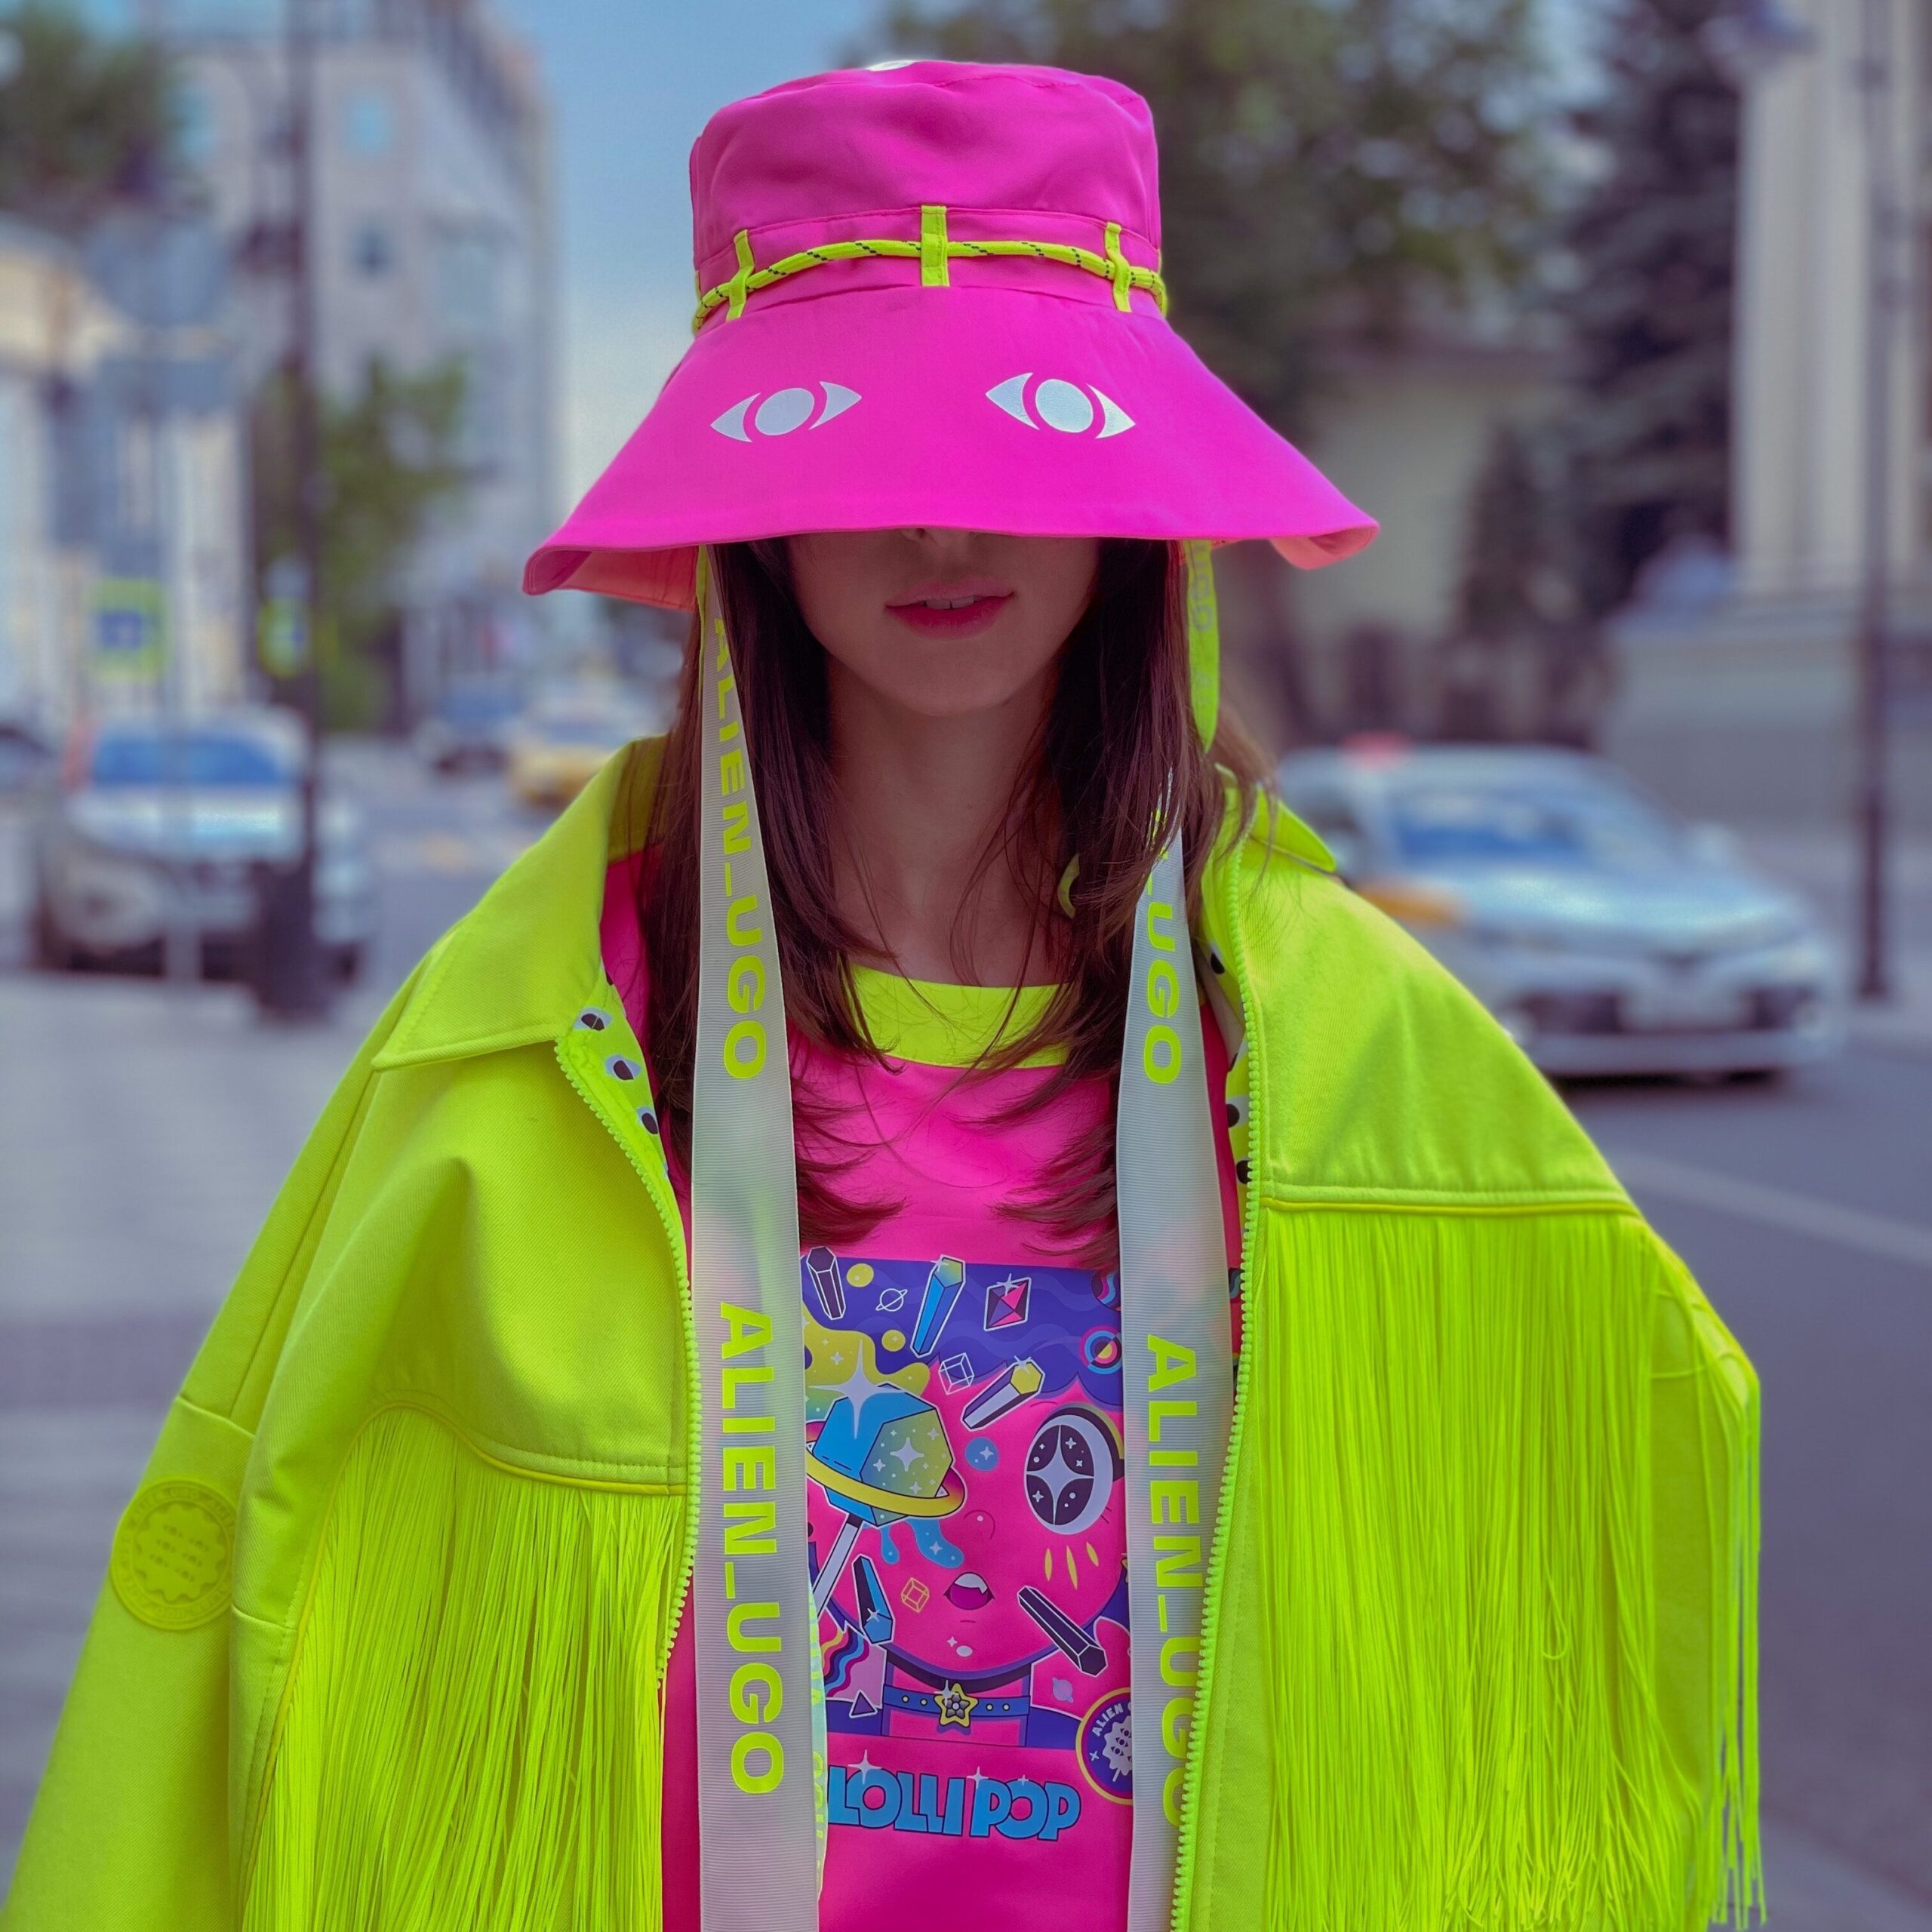 Getting good at sales - girl with neon pink hat and shirt and neon green jacket